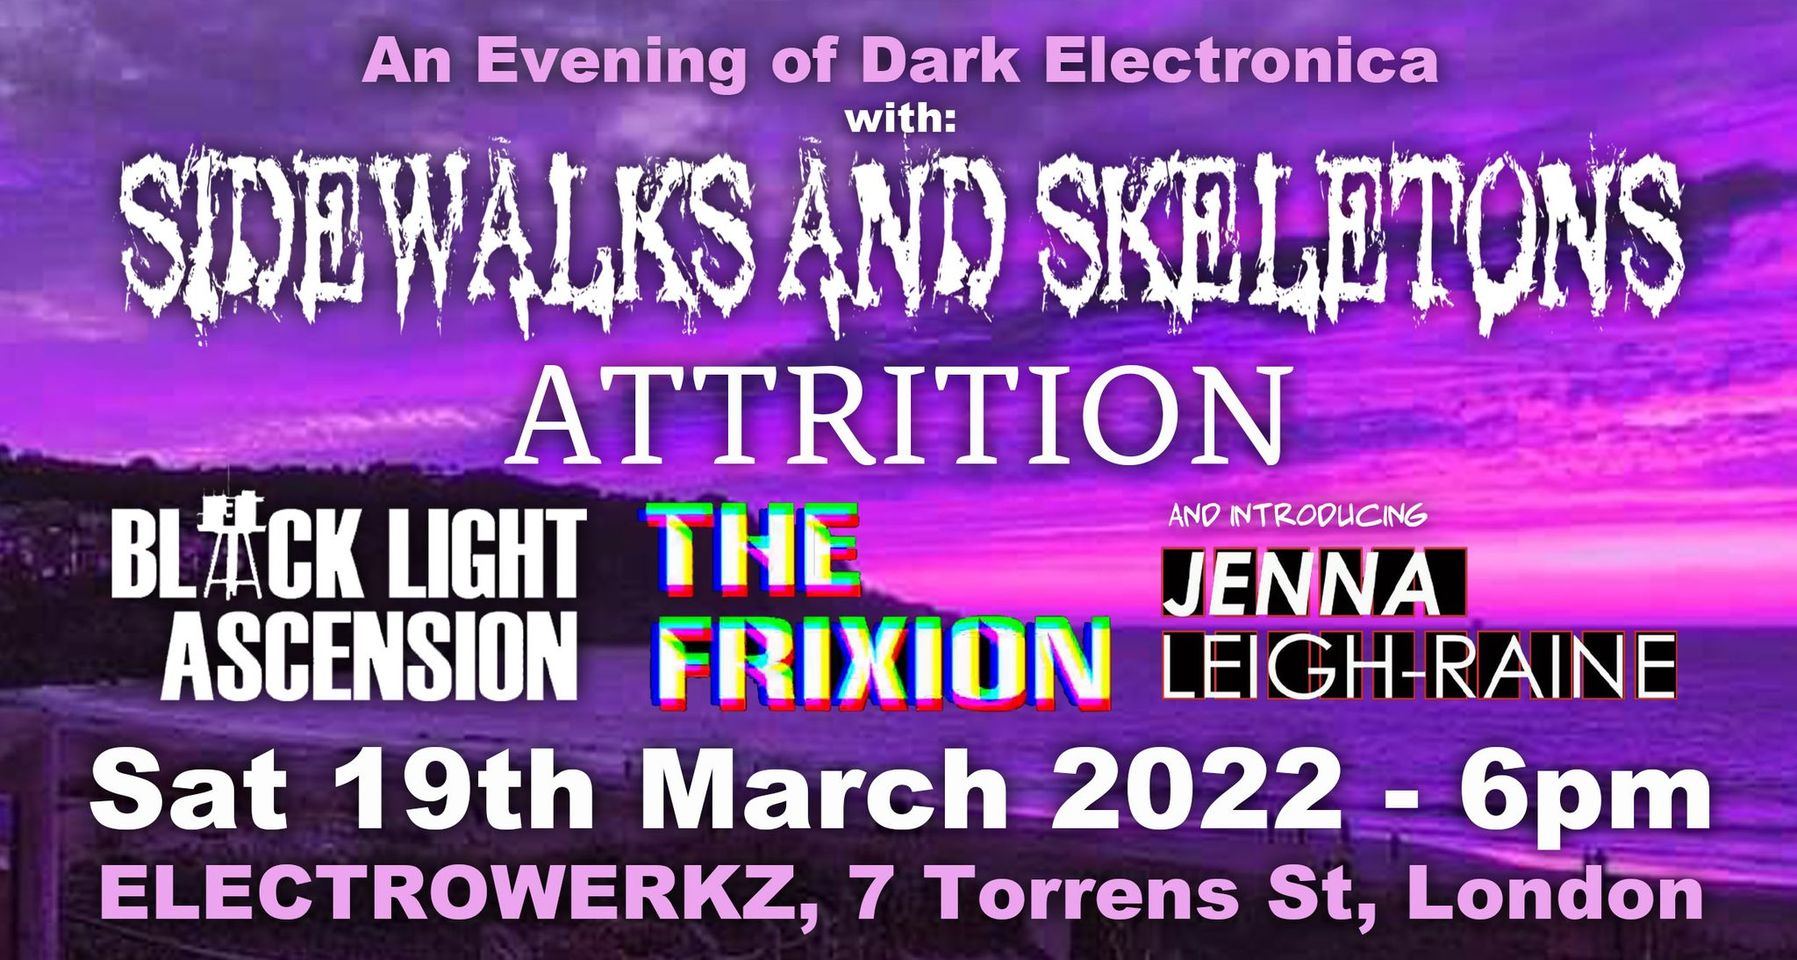 An Evening of Dark Electronica: Sidewalks and Skeletons + Attrition + Black Light Ascension + The Frixion + Jenna Leigh-Raine